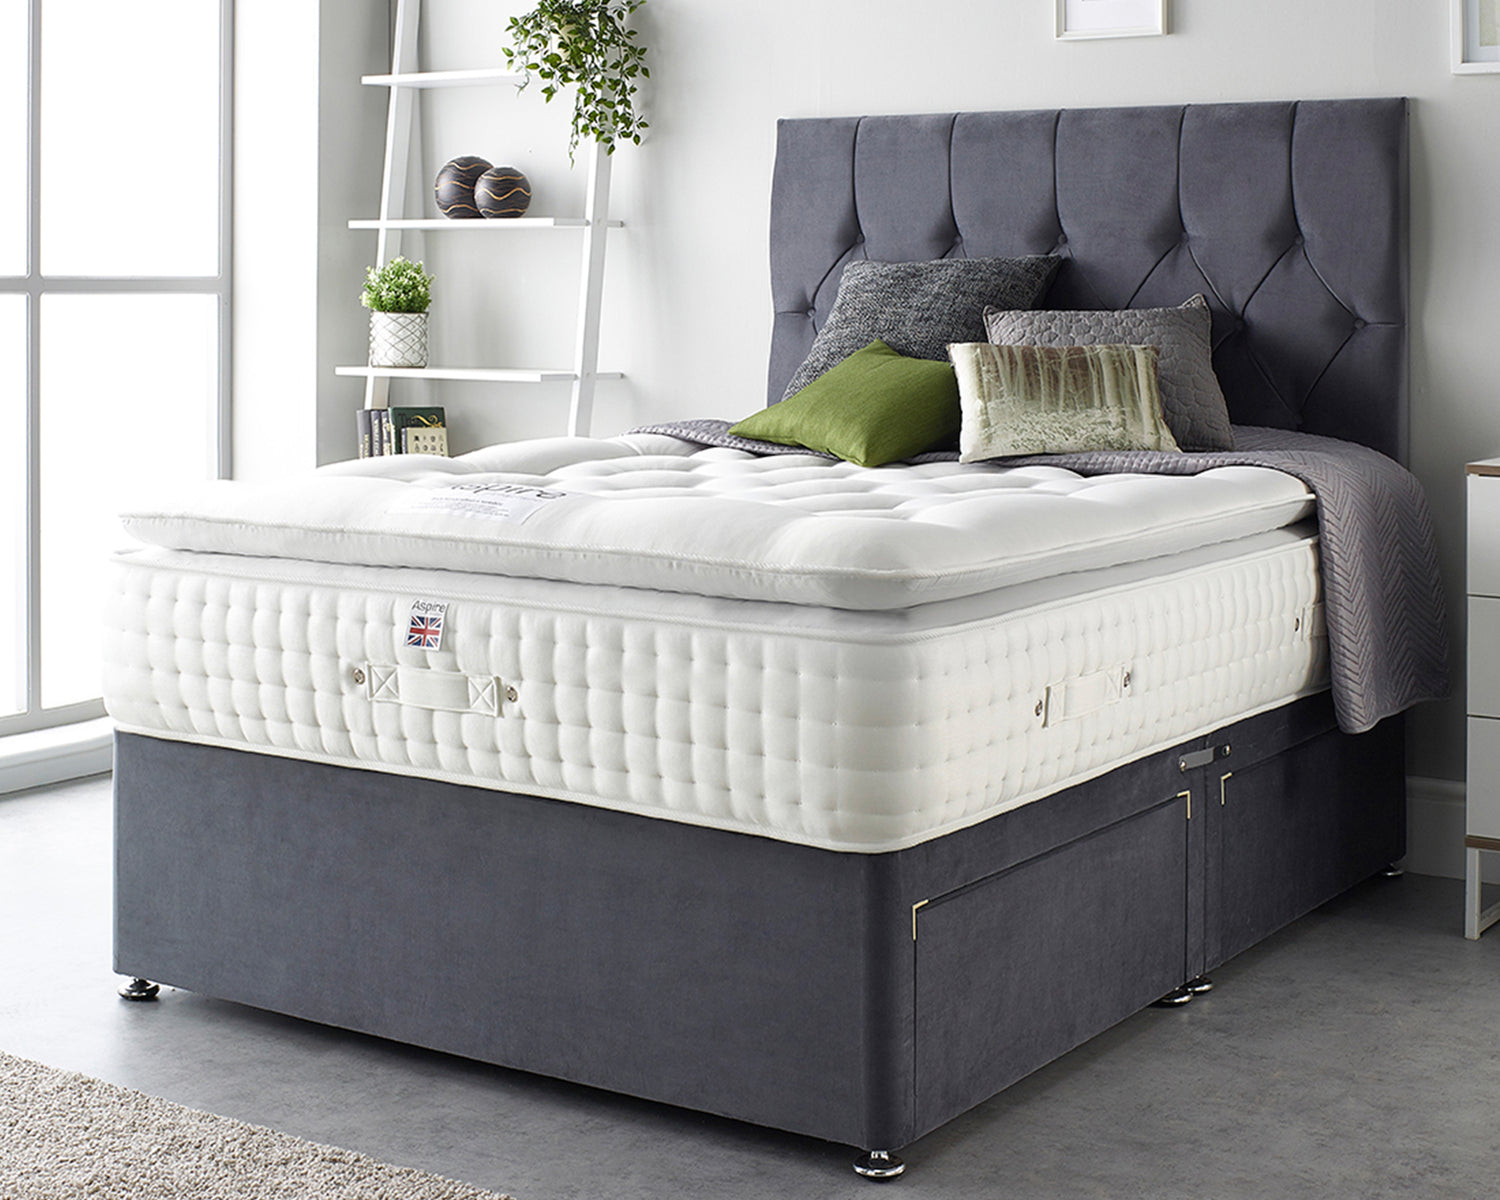 Aspire Alpaca Silk 5000 Pocket Pillowtop Mattress With A King Size Bed-Better Bed Company 